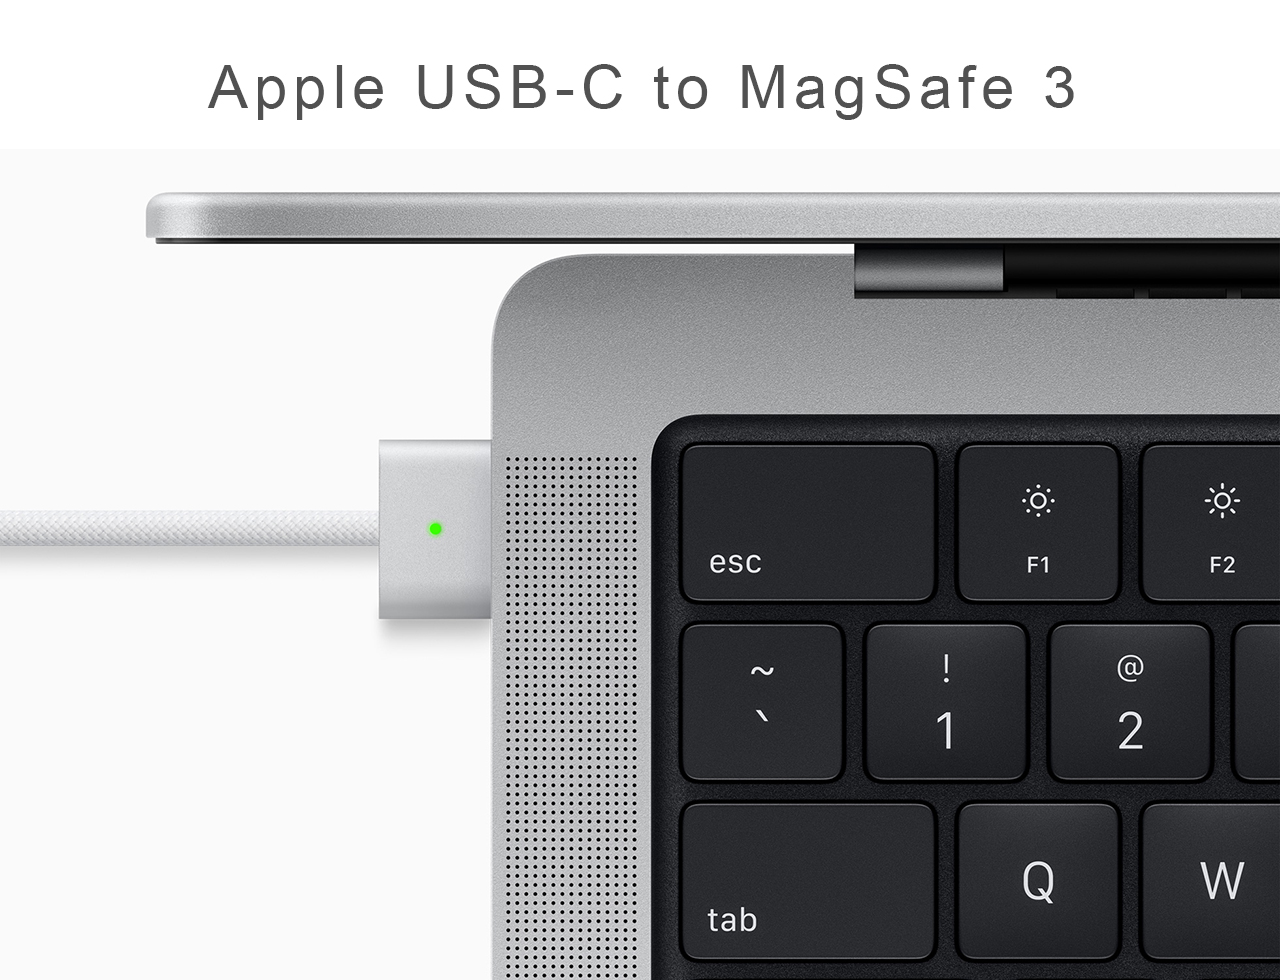 Cable Apple USB-C to MagSafe 3